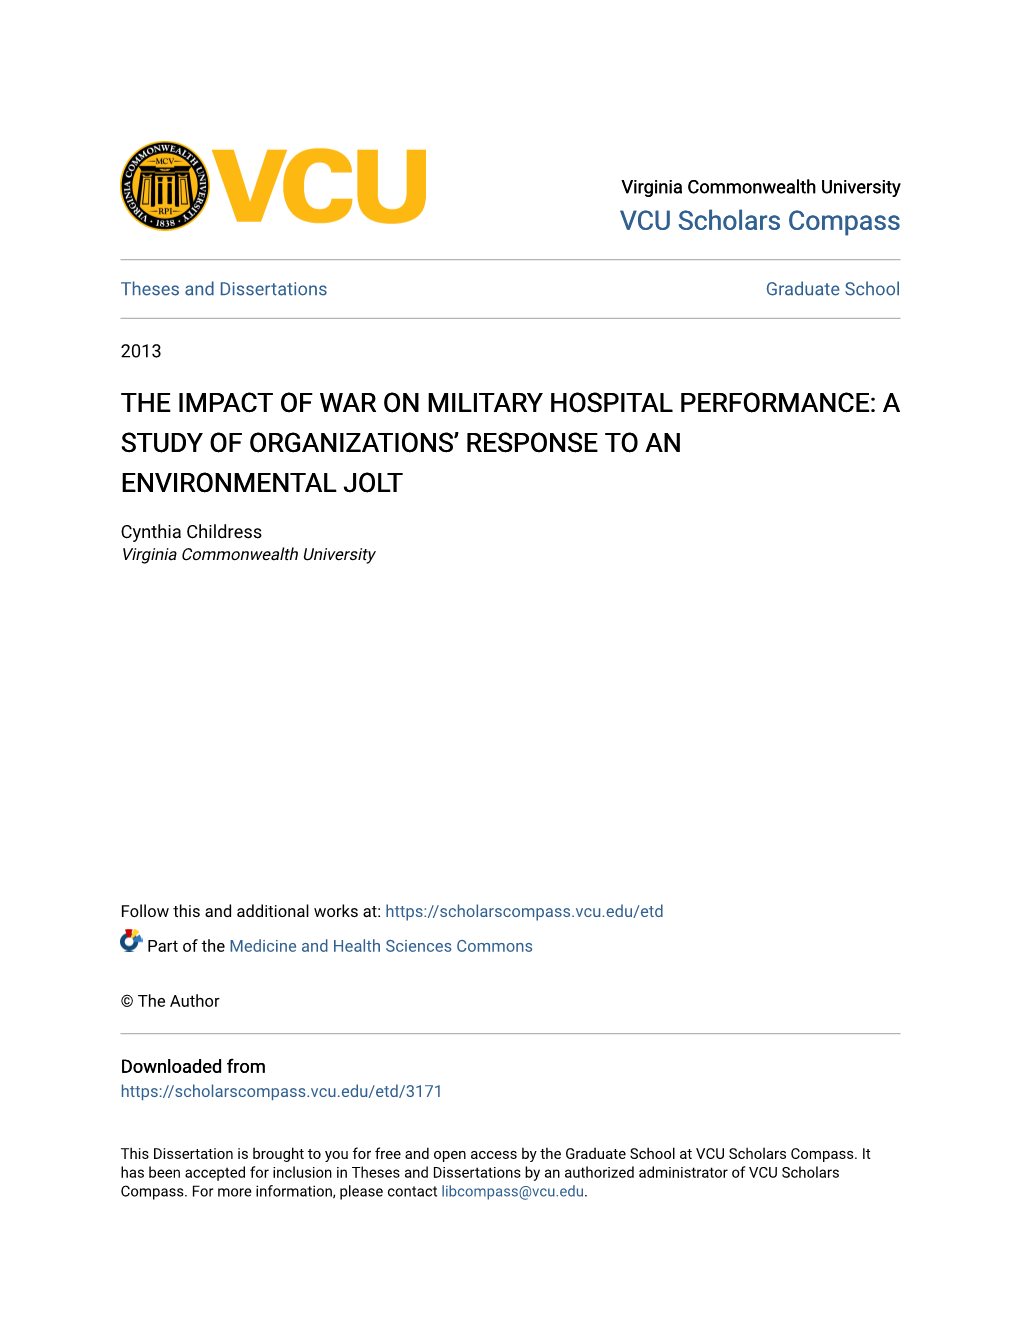 The Impact of War on Military Hospital Performance: a Study of Organizations’ Response to an Environmental Jolt